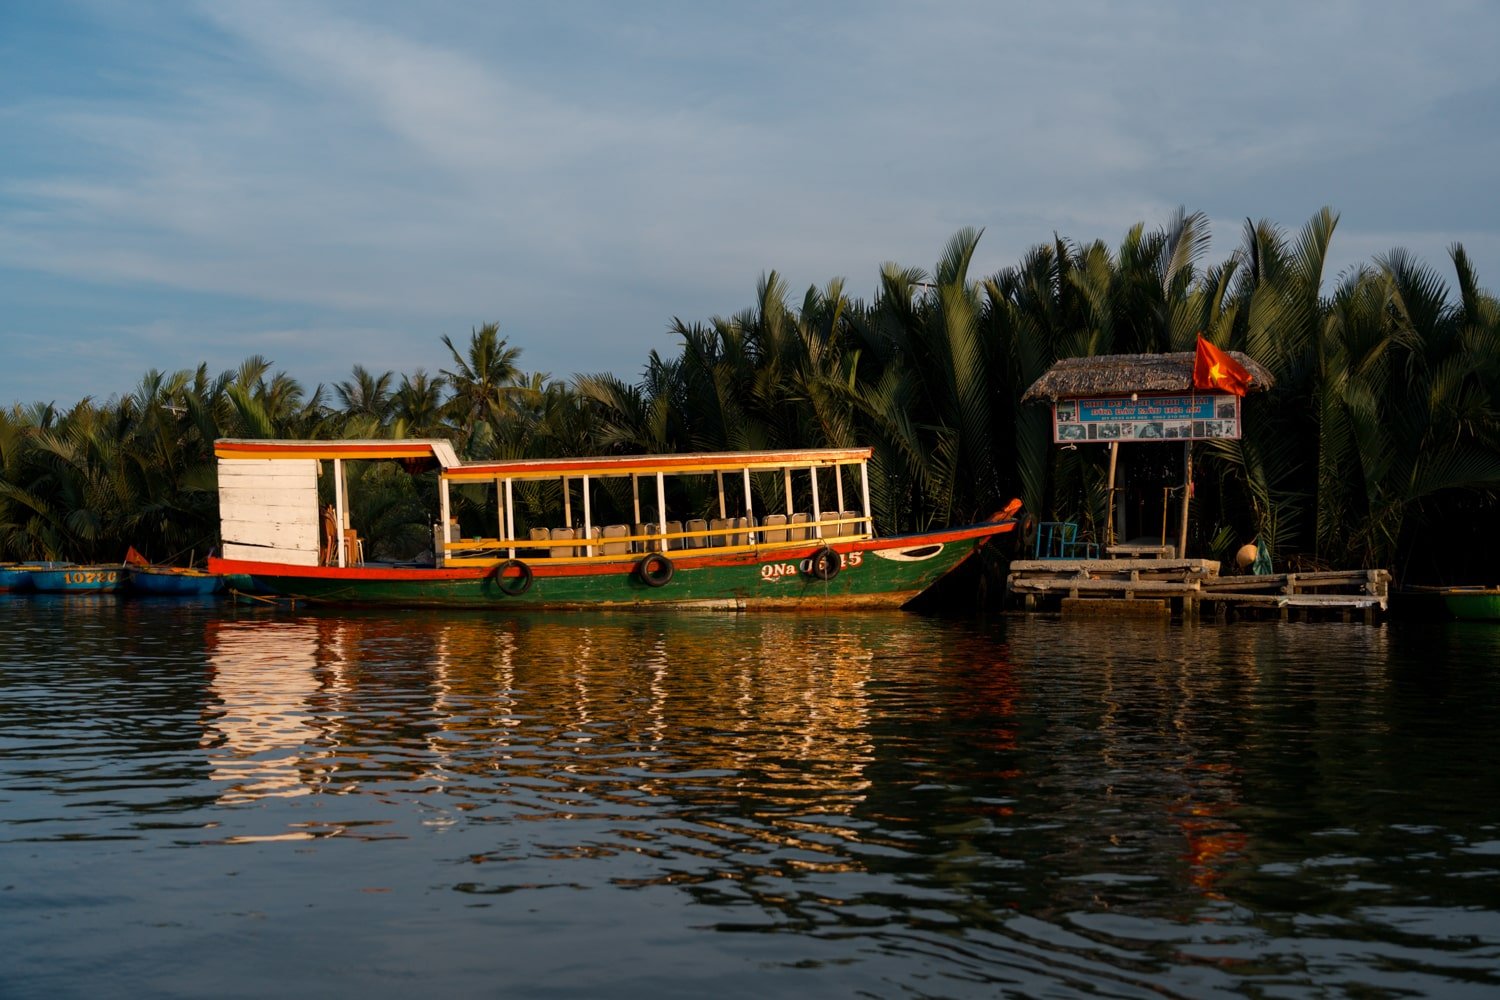 Boat on the Thu Bon River at sunset in Hoi An, Vietnam.